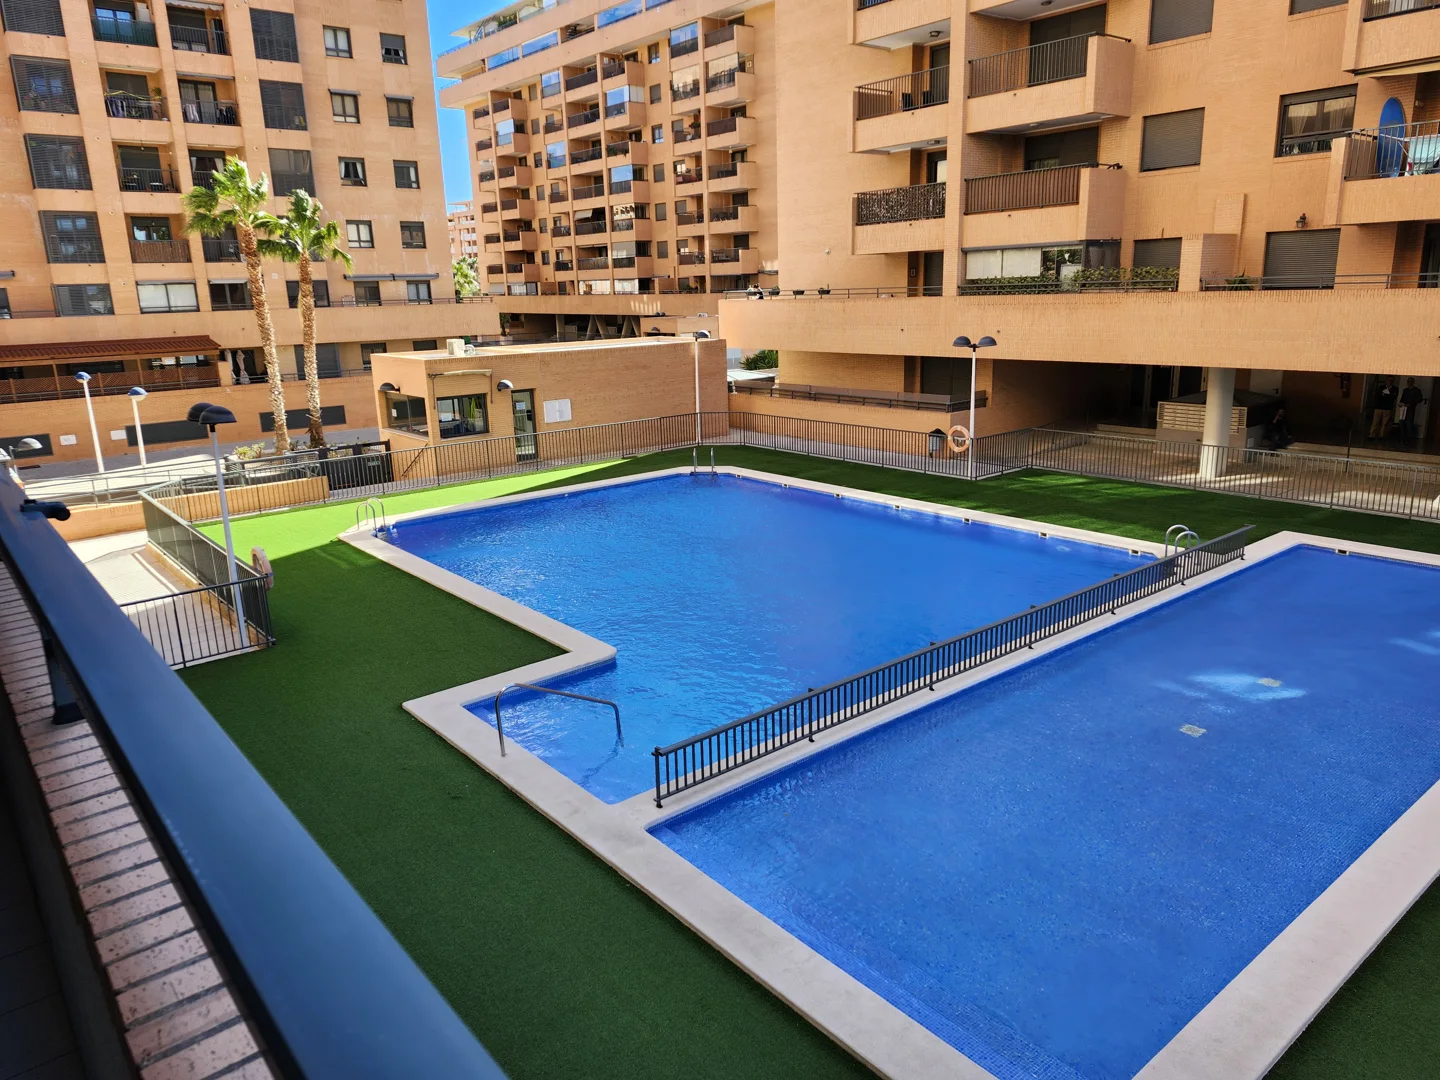 Spectacular apartment in "La Patacona" for July and August